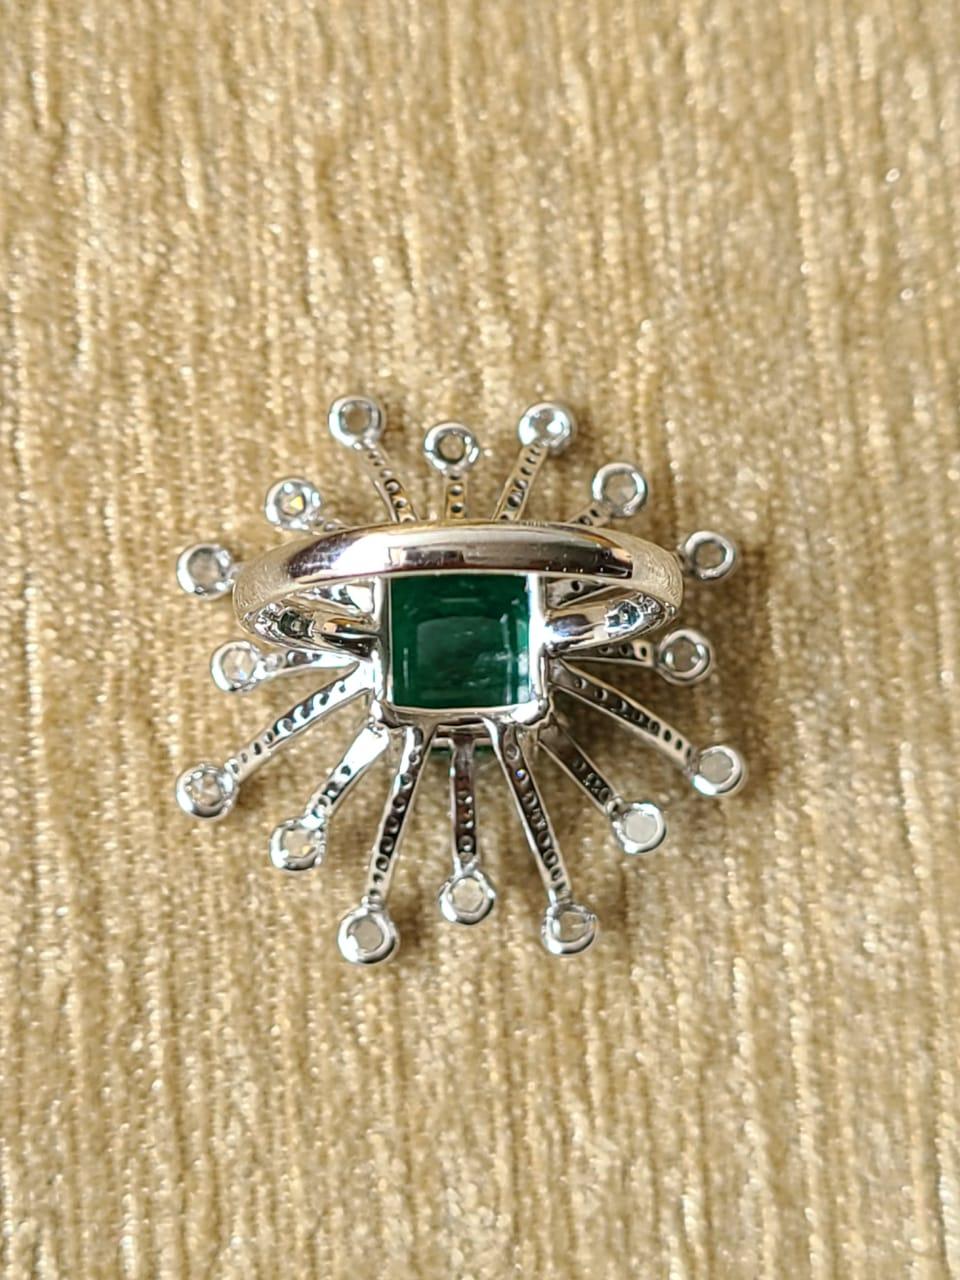 A pretty cocktail ring set in 18k white gold with natural emerald and natural diamonds. The natural emerald weight is 5.26 carats and diamond weight is 1.23 carats. The net gold weight is 6.892 grams and ring dimensions in cm 3.1 x 3.1 x 3 (LXWXH).